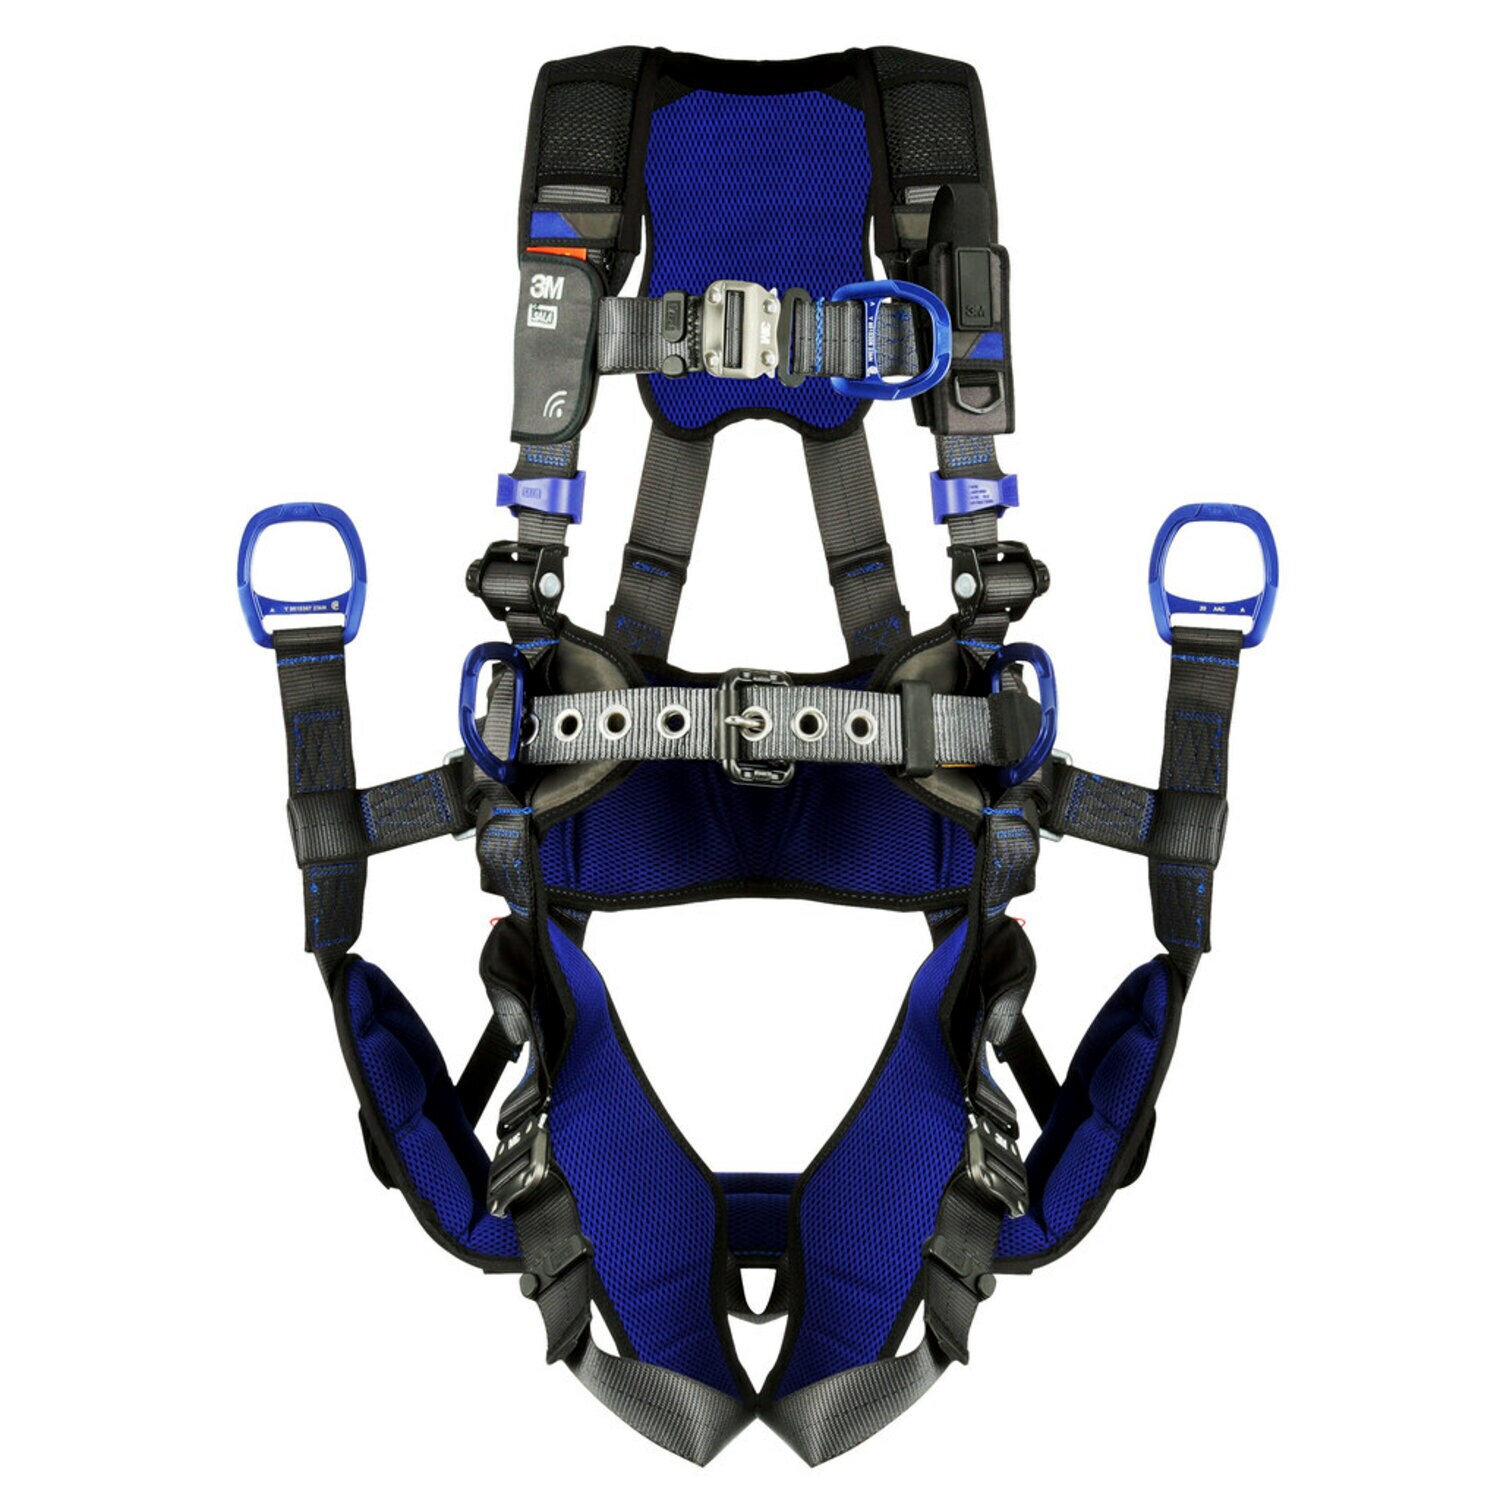 7012816239 - 3M DBI-SALA ExoFit NEX X300 Comfort Tower Climbing/Positioning/Suspension Safety Harness with Mesh Shoulders 1113193, X-Large